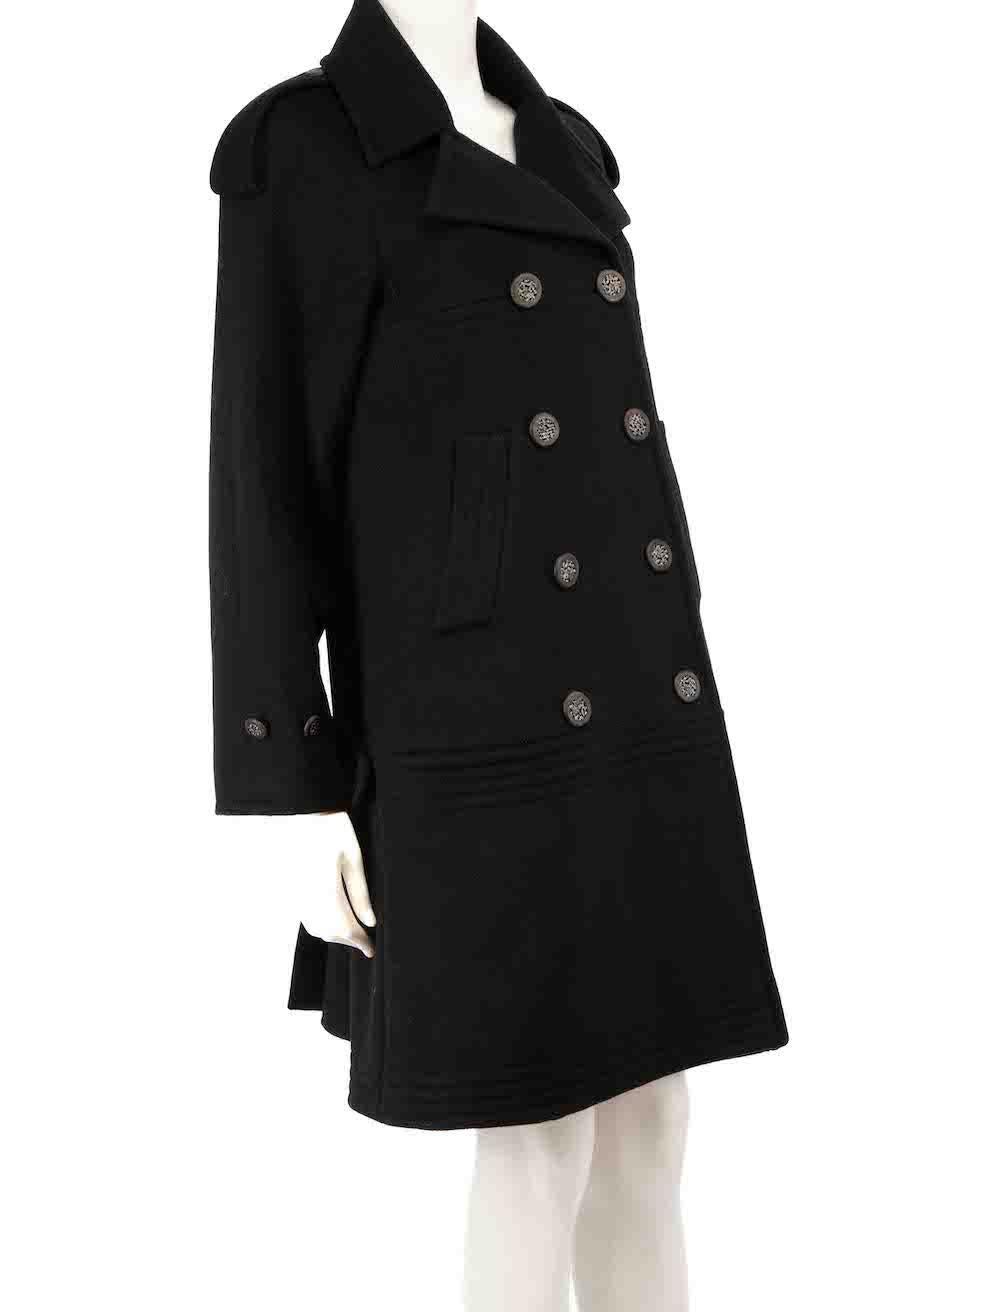 CONDITION is Very good. Hardly any visible wear to coat is evident on this used Chanel designer resale item.
 
 
 
 Details
 
 
 Black
 
 Wool
 
 Coat
 
 Double breasted
 
 Button up fastening
 
 Buttoned shoulder and cuff tabs
 
 2x Side pockets
 
